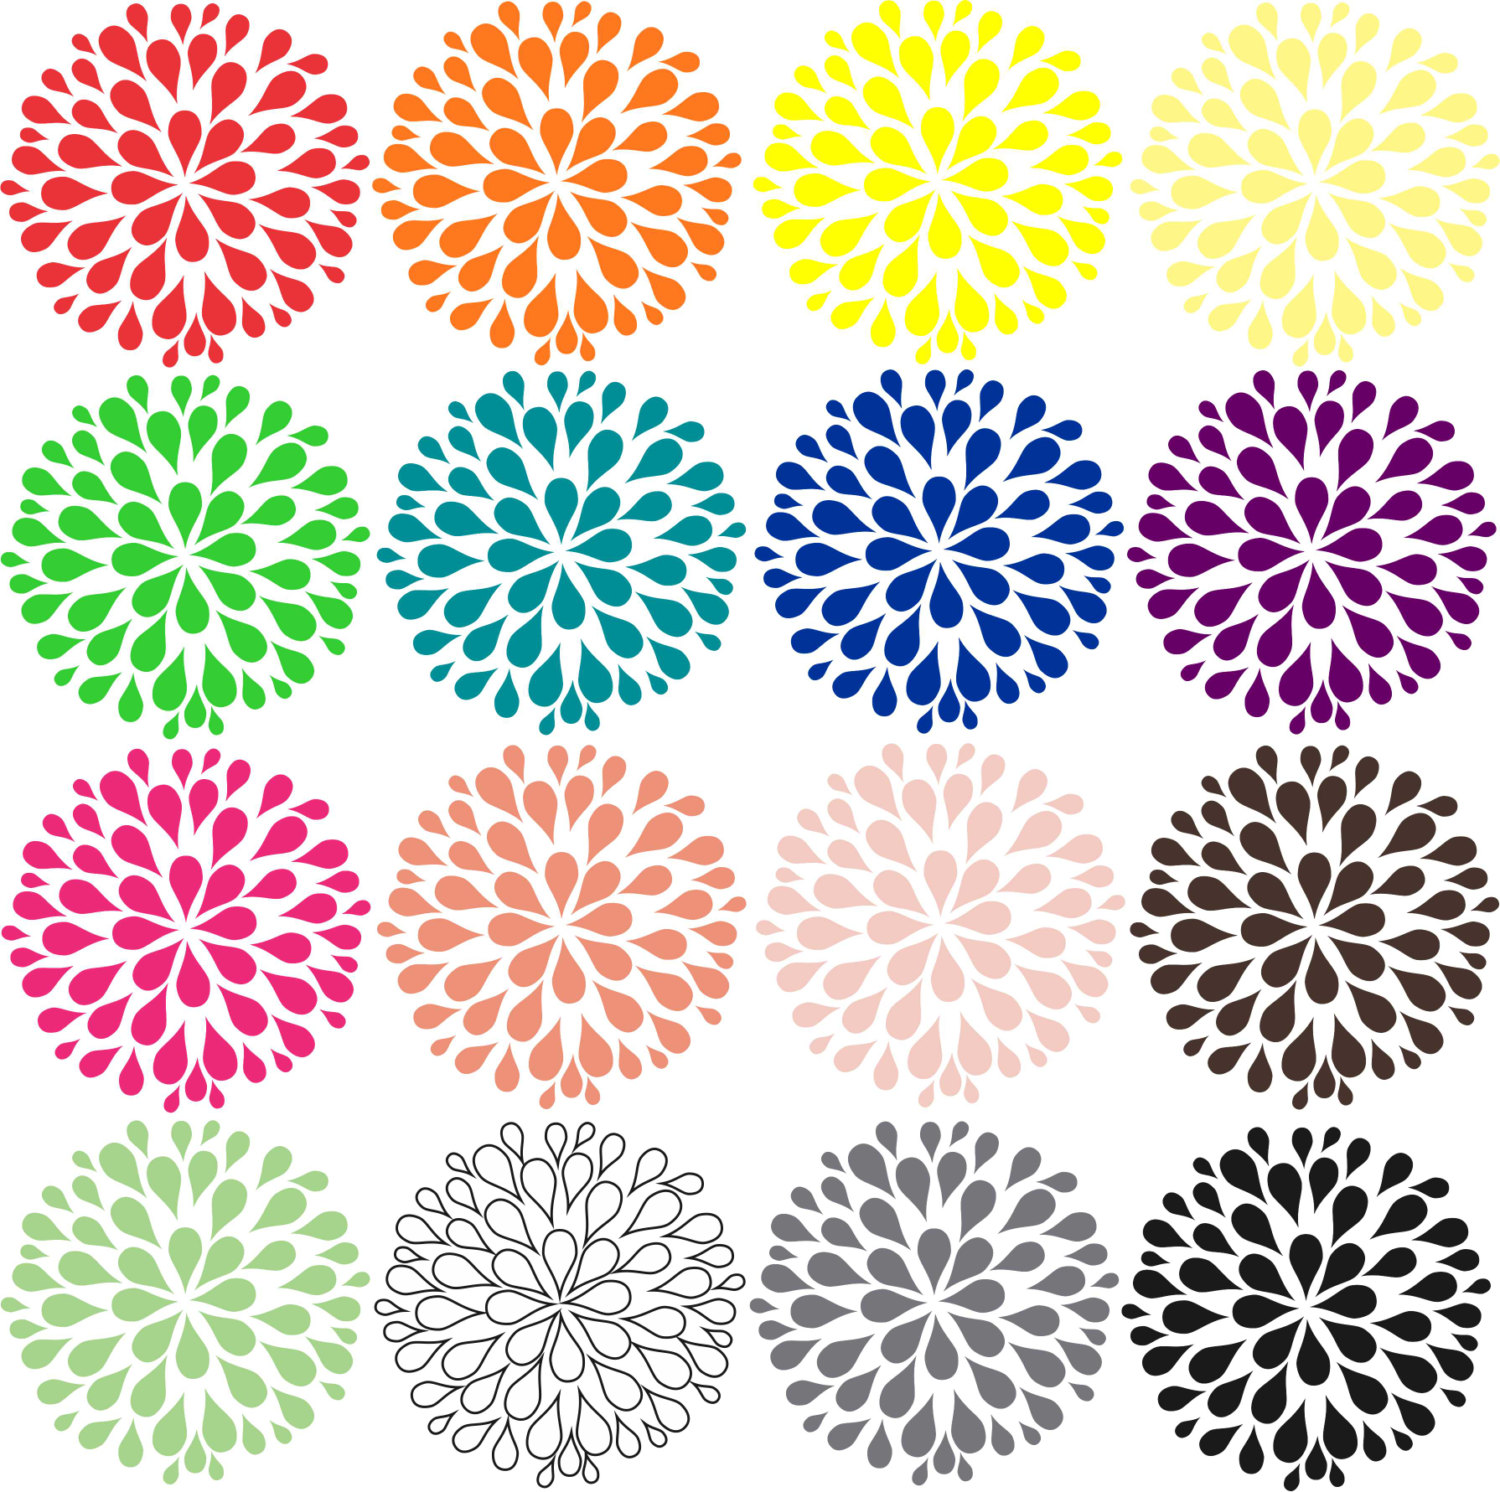 Dahlia clipart #3, Download drawings